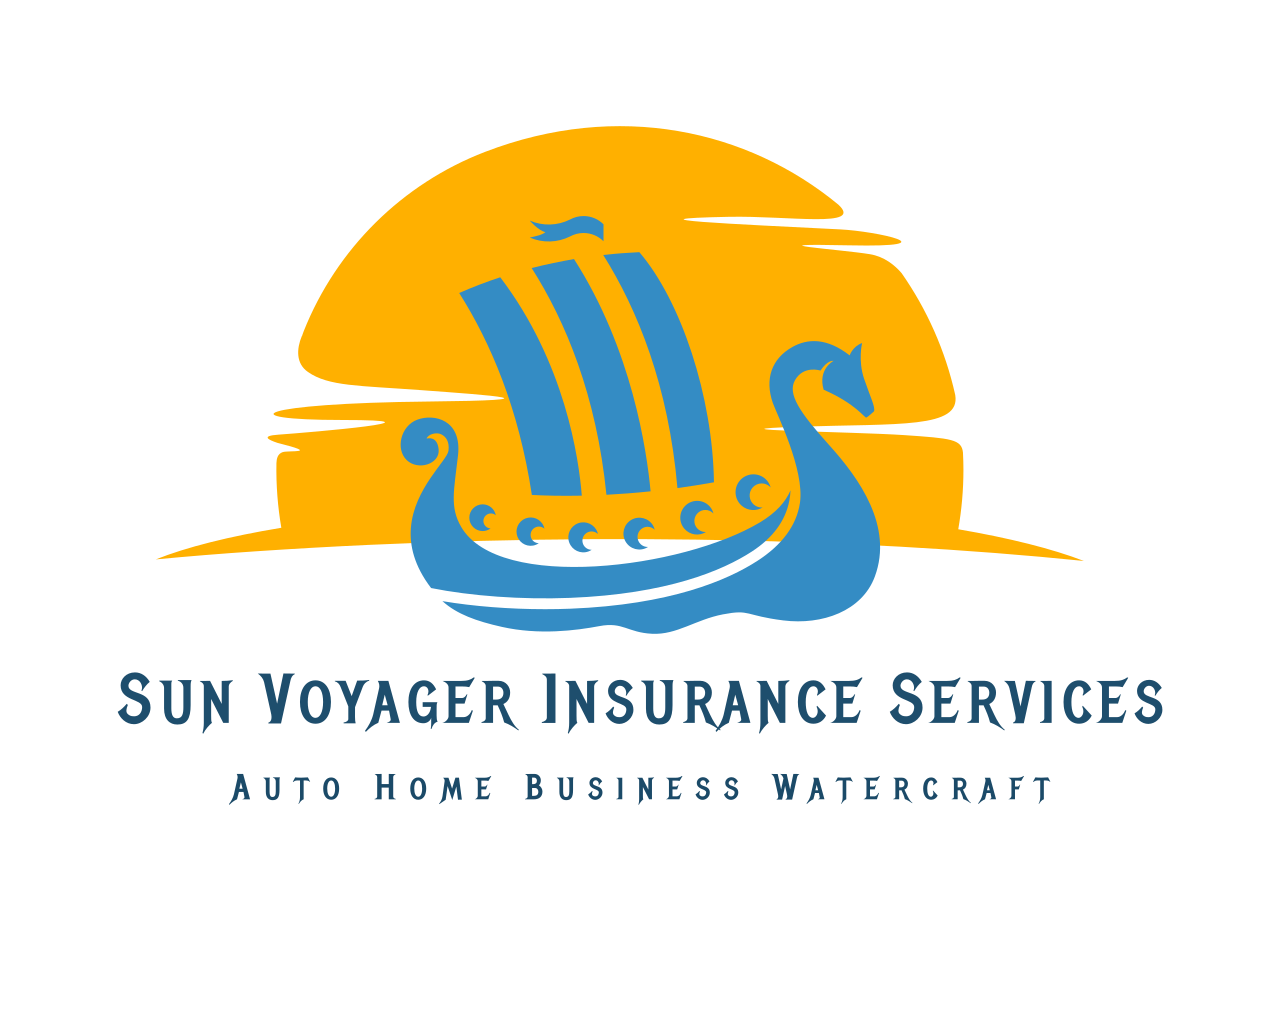 Sun Voyager Insurance Services